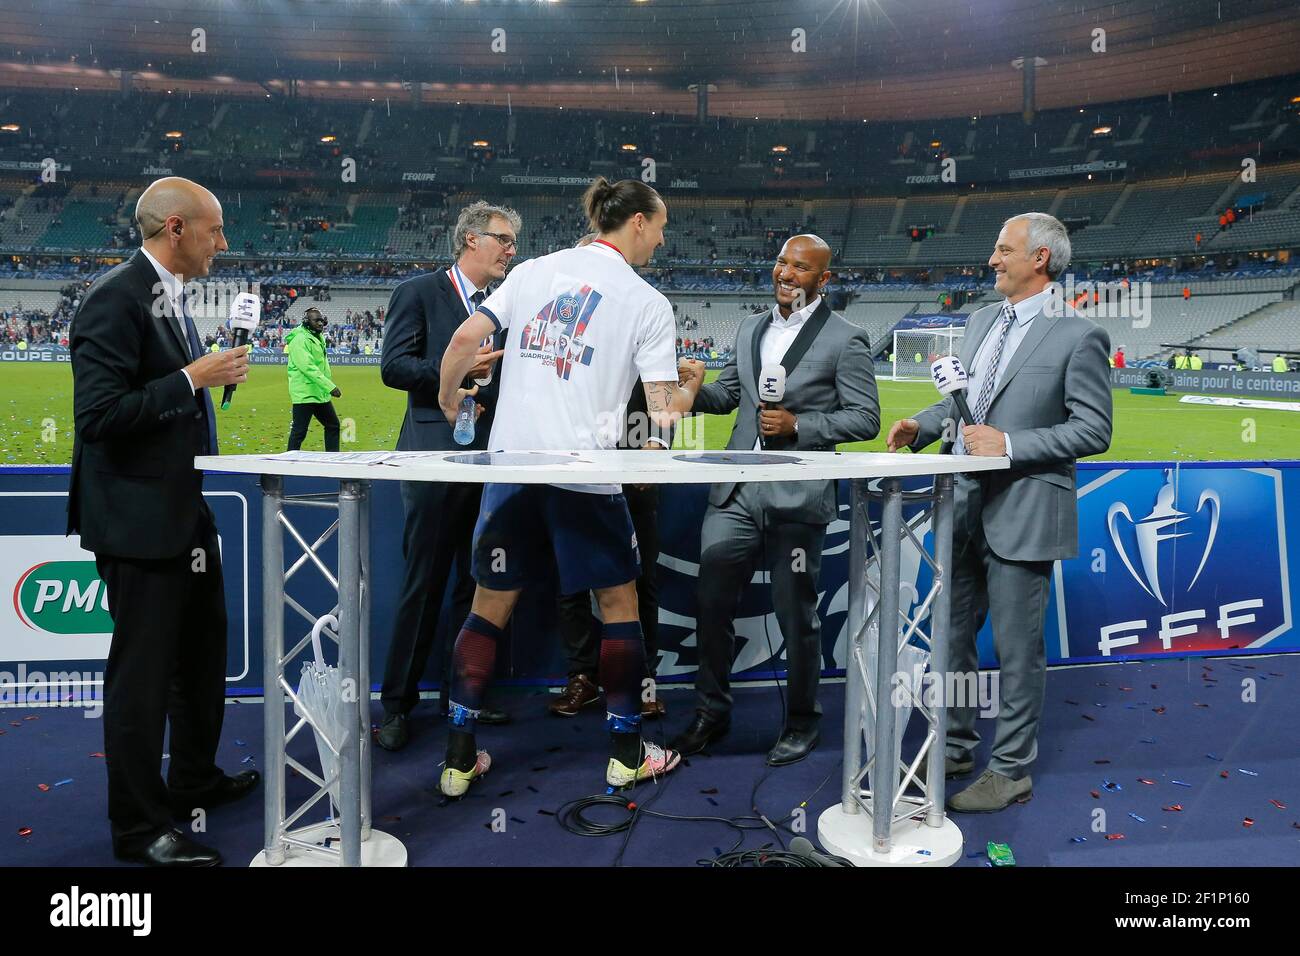 Zlatan Ibrahimovic (psg), Olivier Dacourt, Laurent Blanc (psg) on  broadcasting live tv program for Eurosport during the French Cup Final  football match between Olympique de Marseille and Paris Saint Germain on May